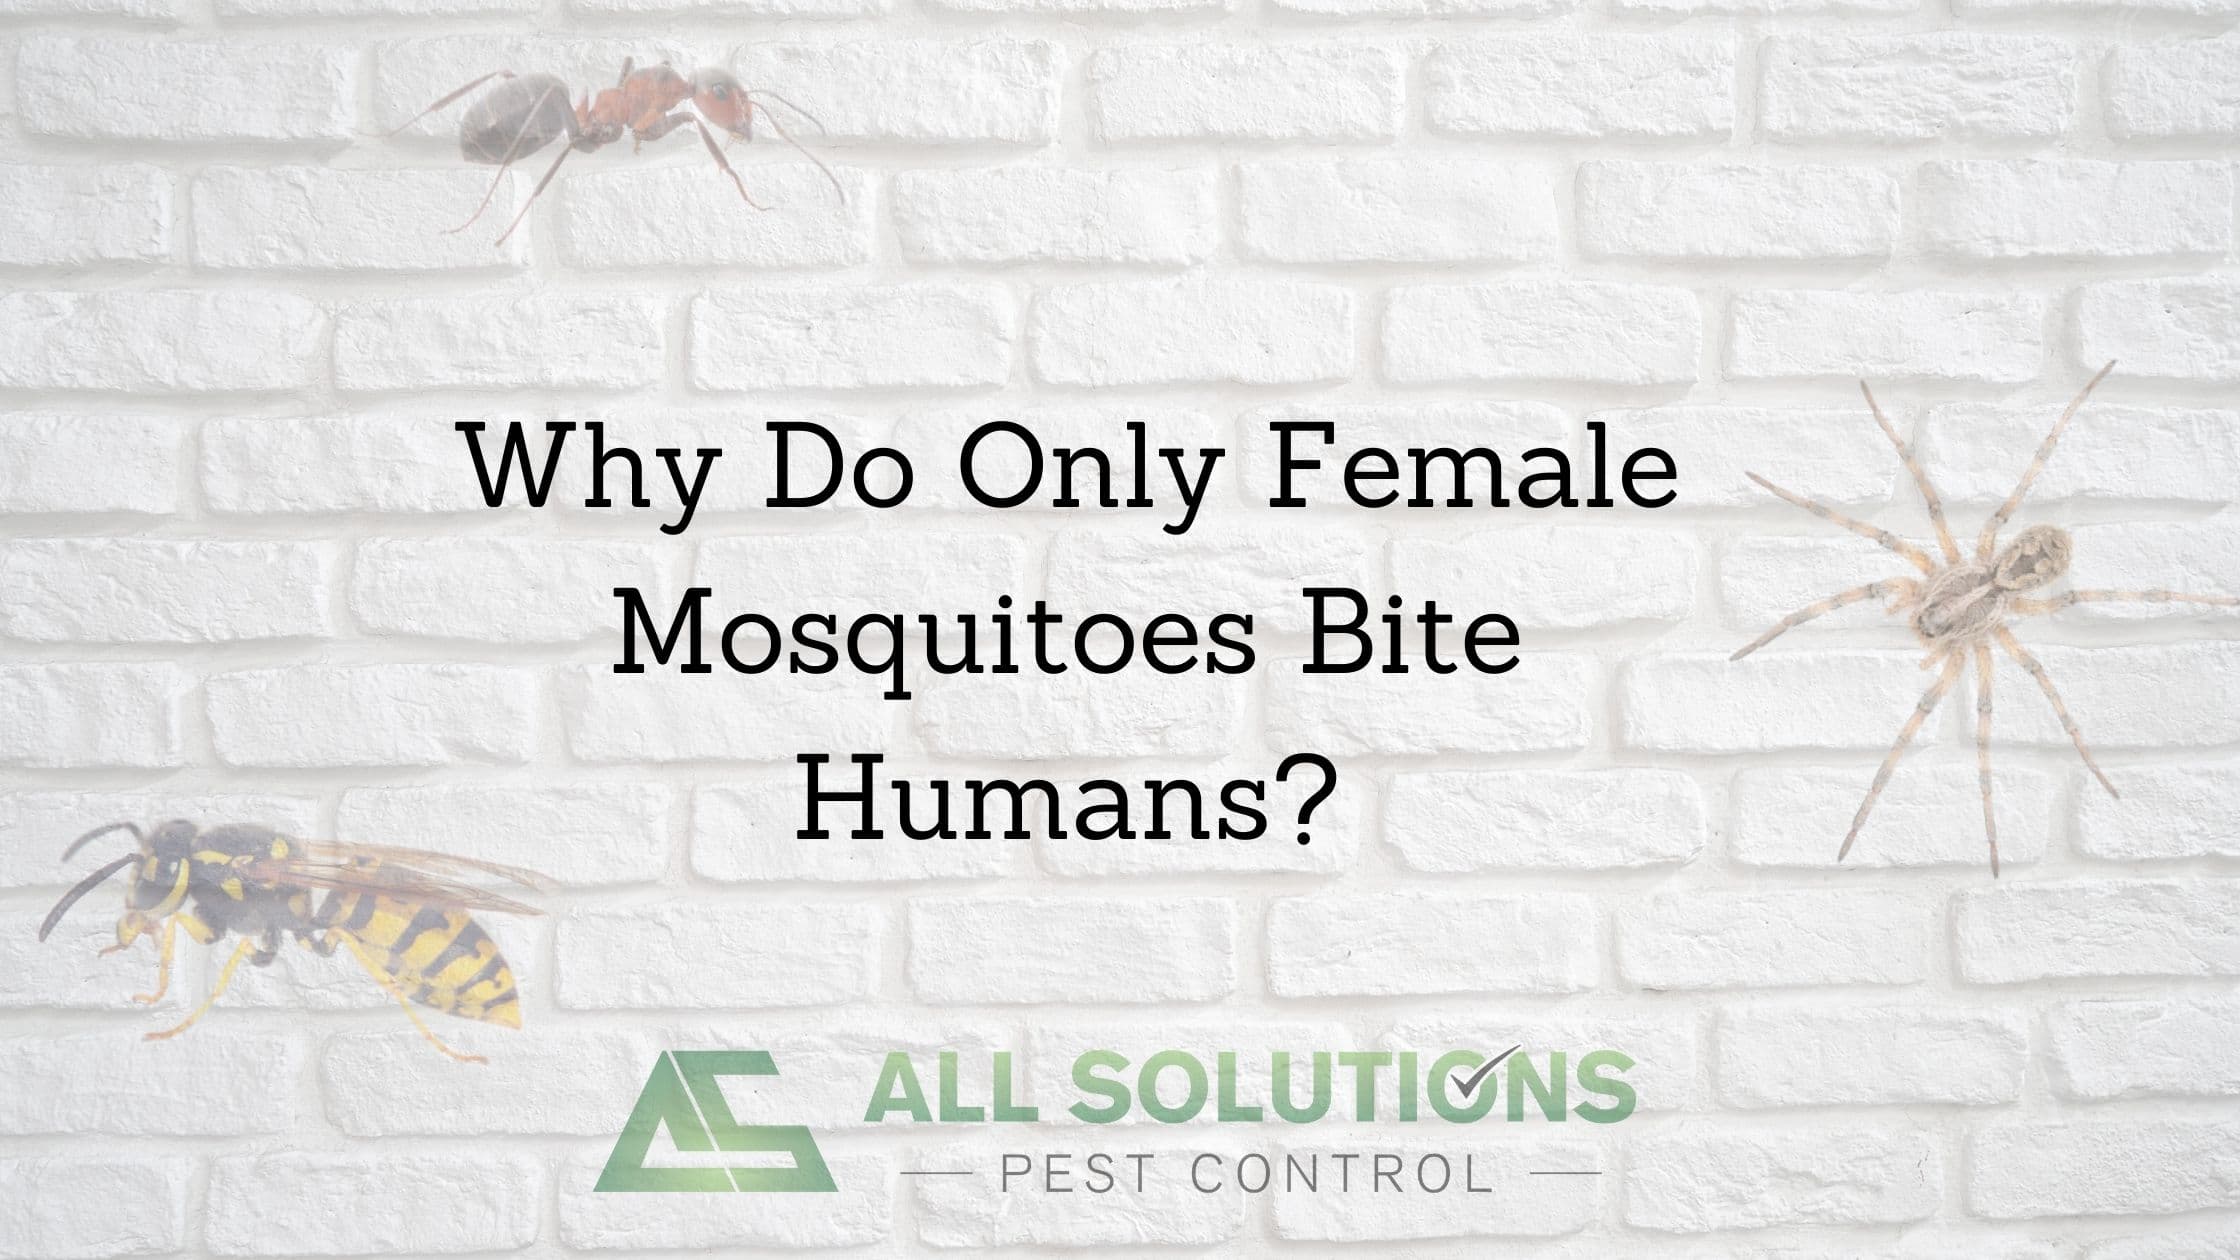 https://www.allsolutionspestcontrol.com/wp-content/uploads/2021/11/Why-Do-Only-Female-Mosquitoes-Bite-Humans.jpg